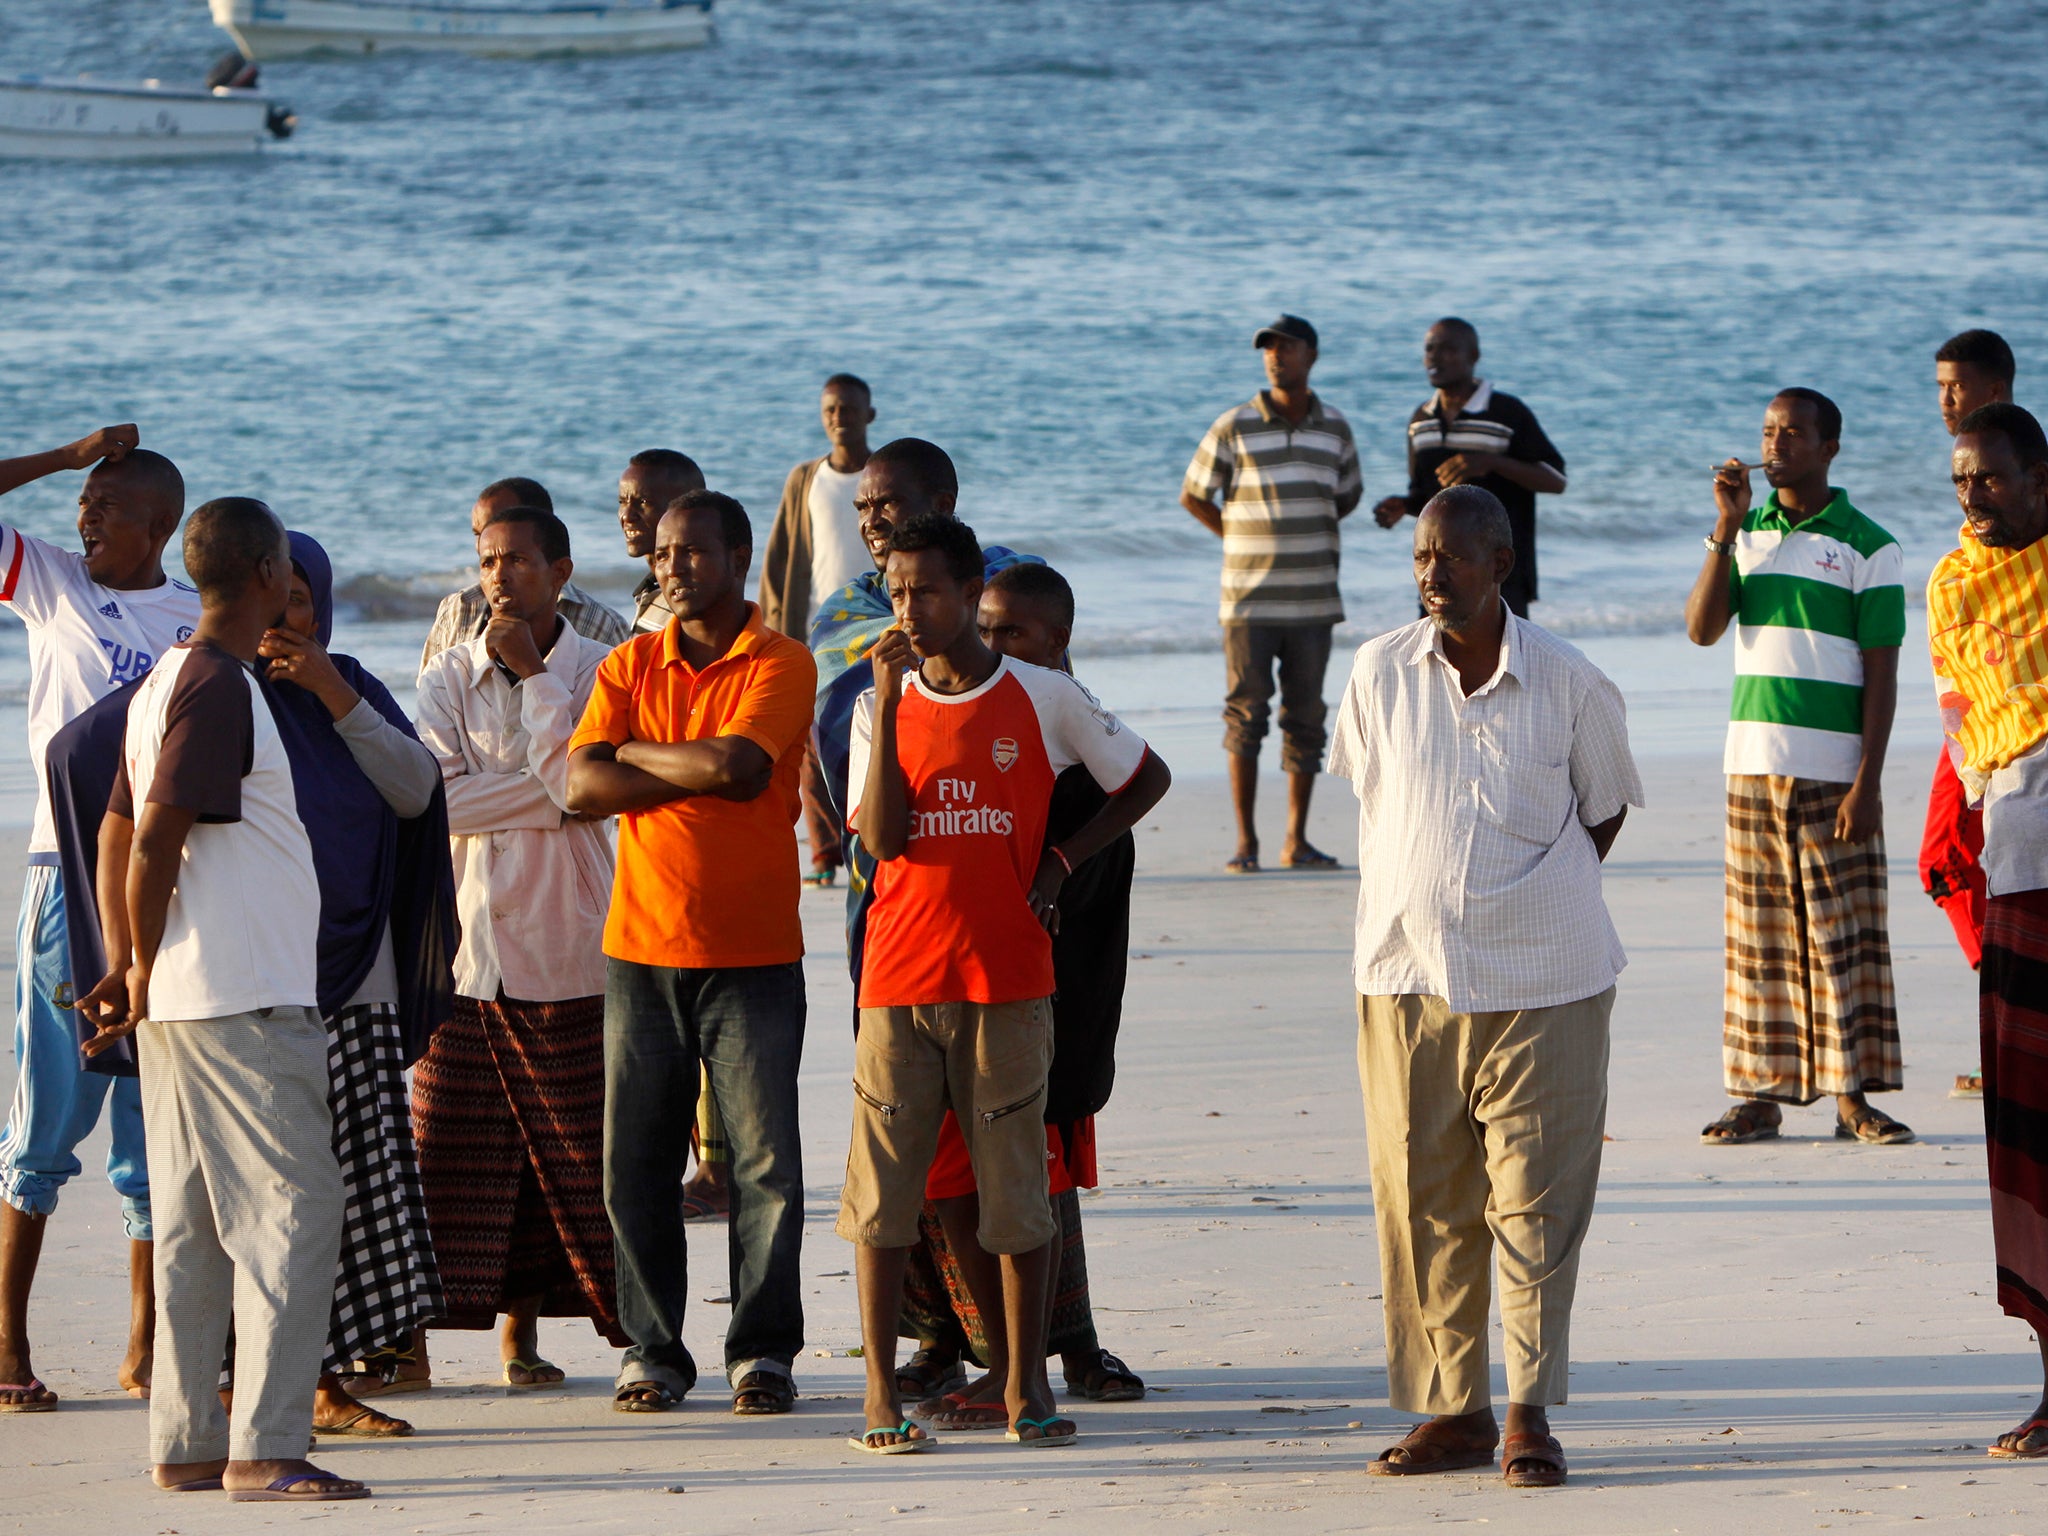 Al-Shabaab has also been launching attacks in Somalia, where at least 20 people were massacred on a beach on Thursday